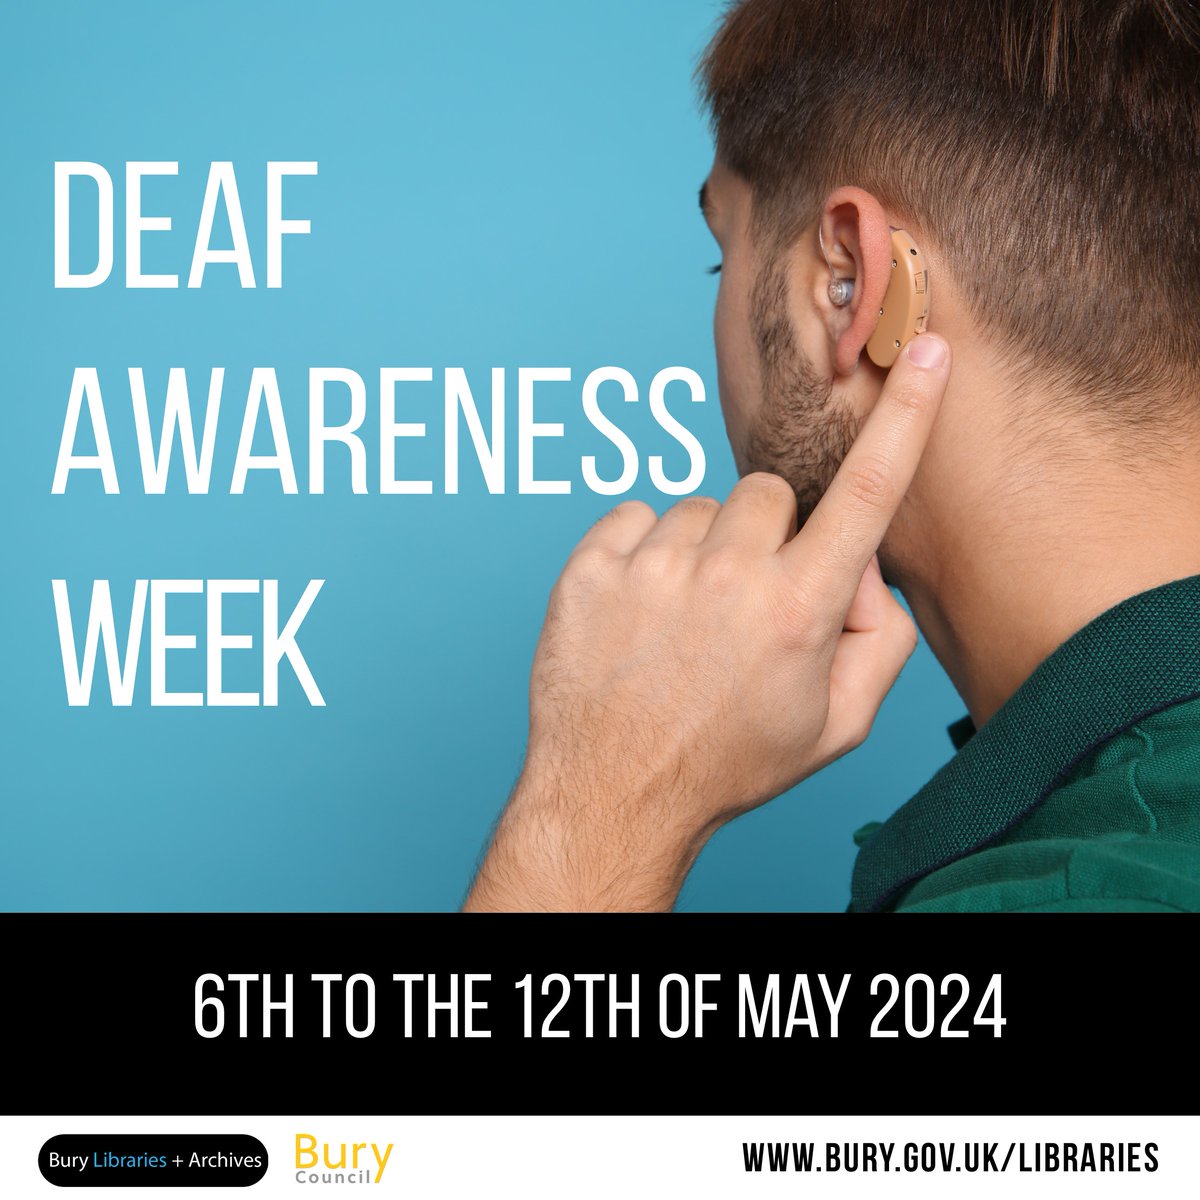 #DeafAwarenessWeek 🦻 aims to increase the visibility of the challenges that the deaf community encounters. Find out about the local support available in #Bury for people who are struggling with a hearing loss at: bit.ly/DeafAwareWeek24. @UKDeafCouncil @BuryCouncil